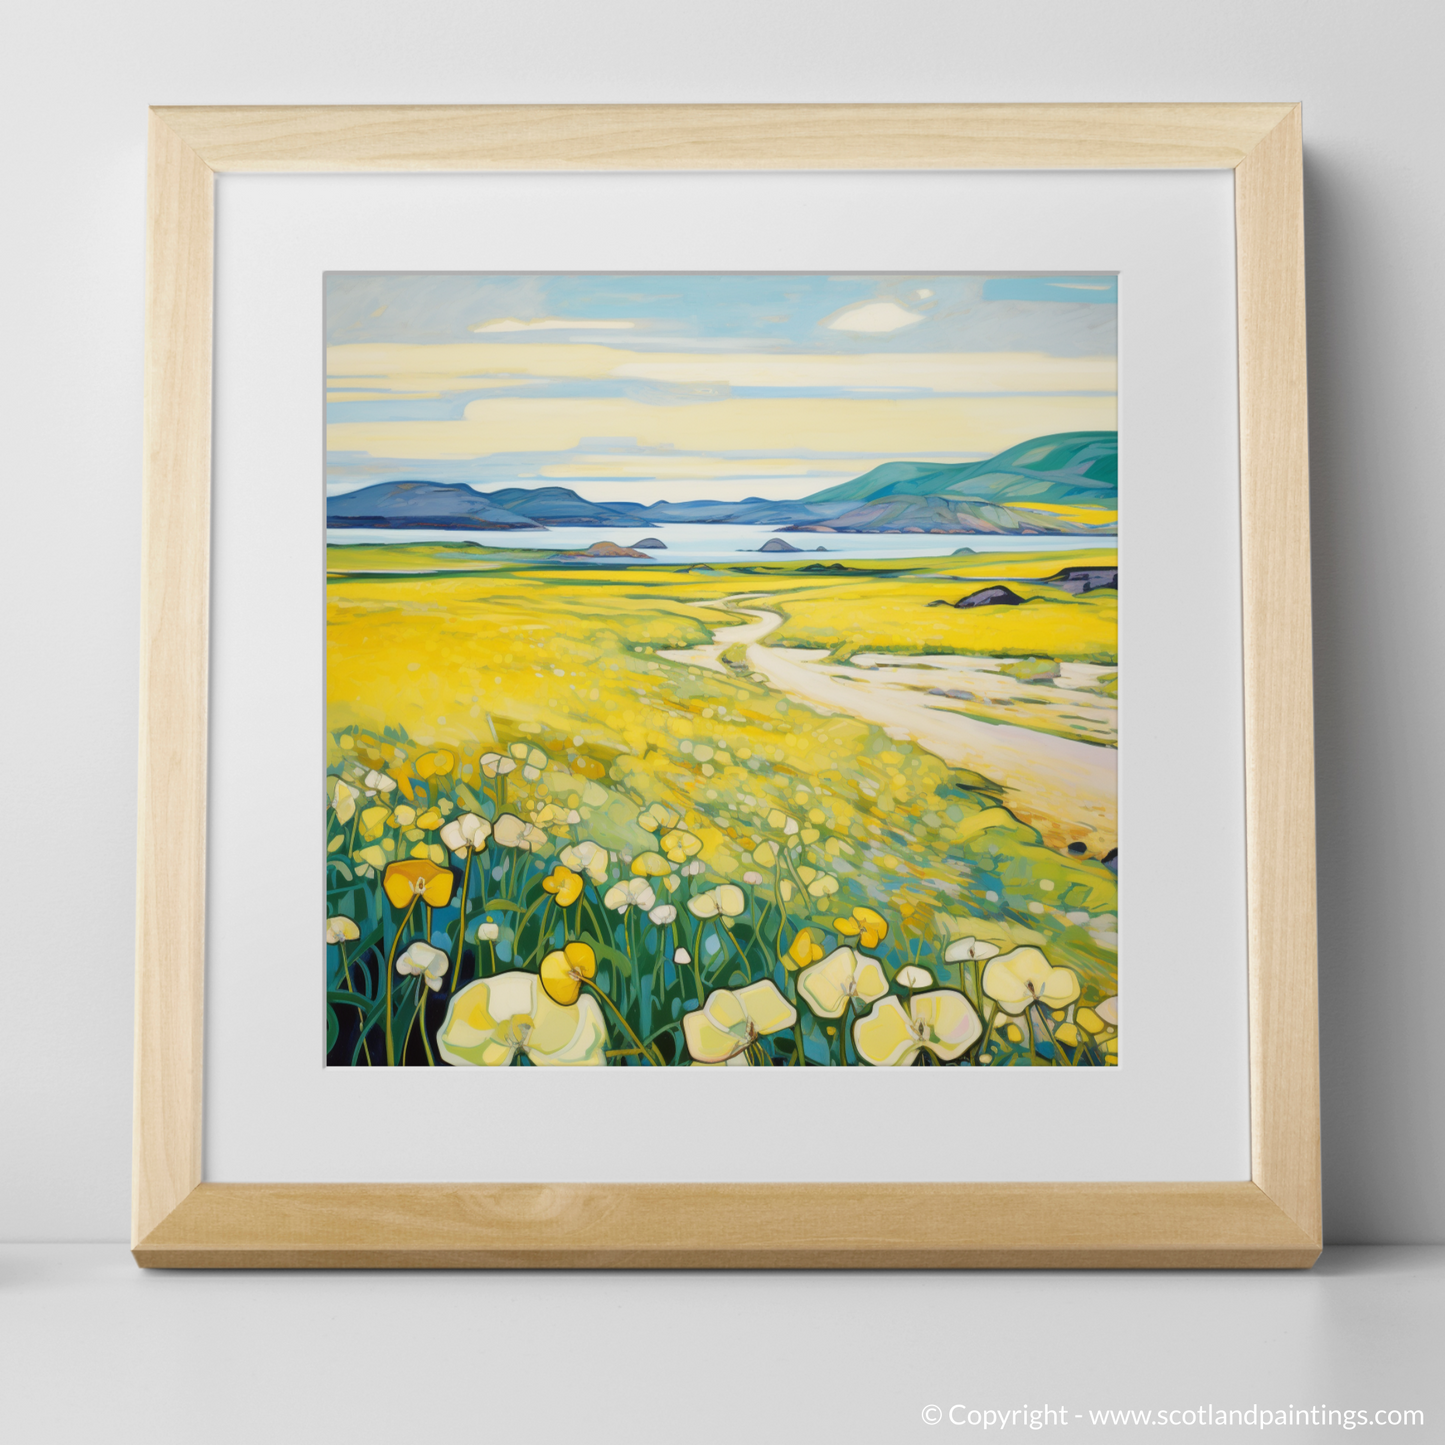 Machair Mosaic: A Cubist Tribute to Yellow Rattle of the Outer Hebrides